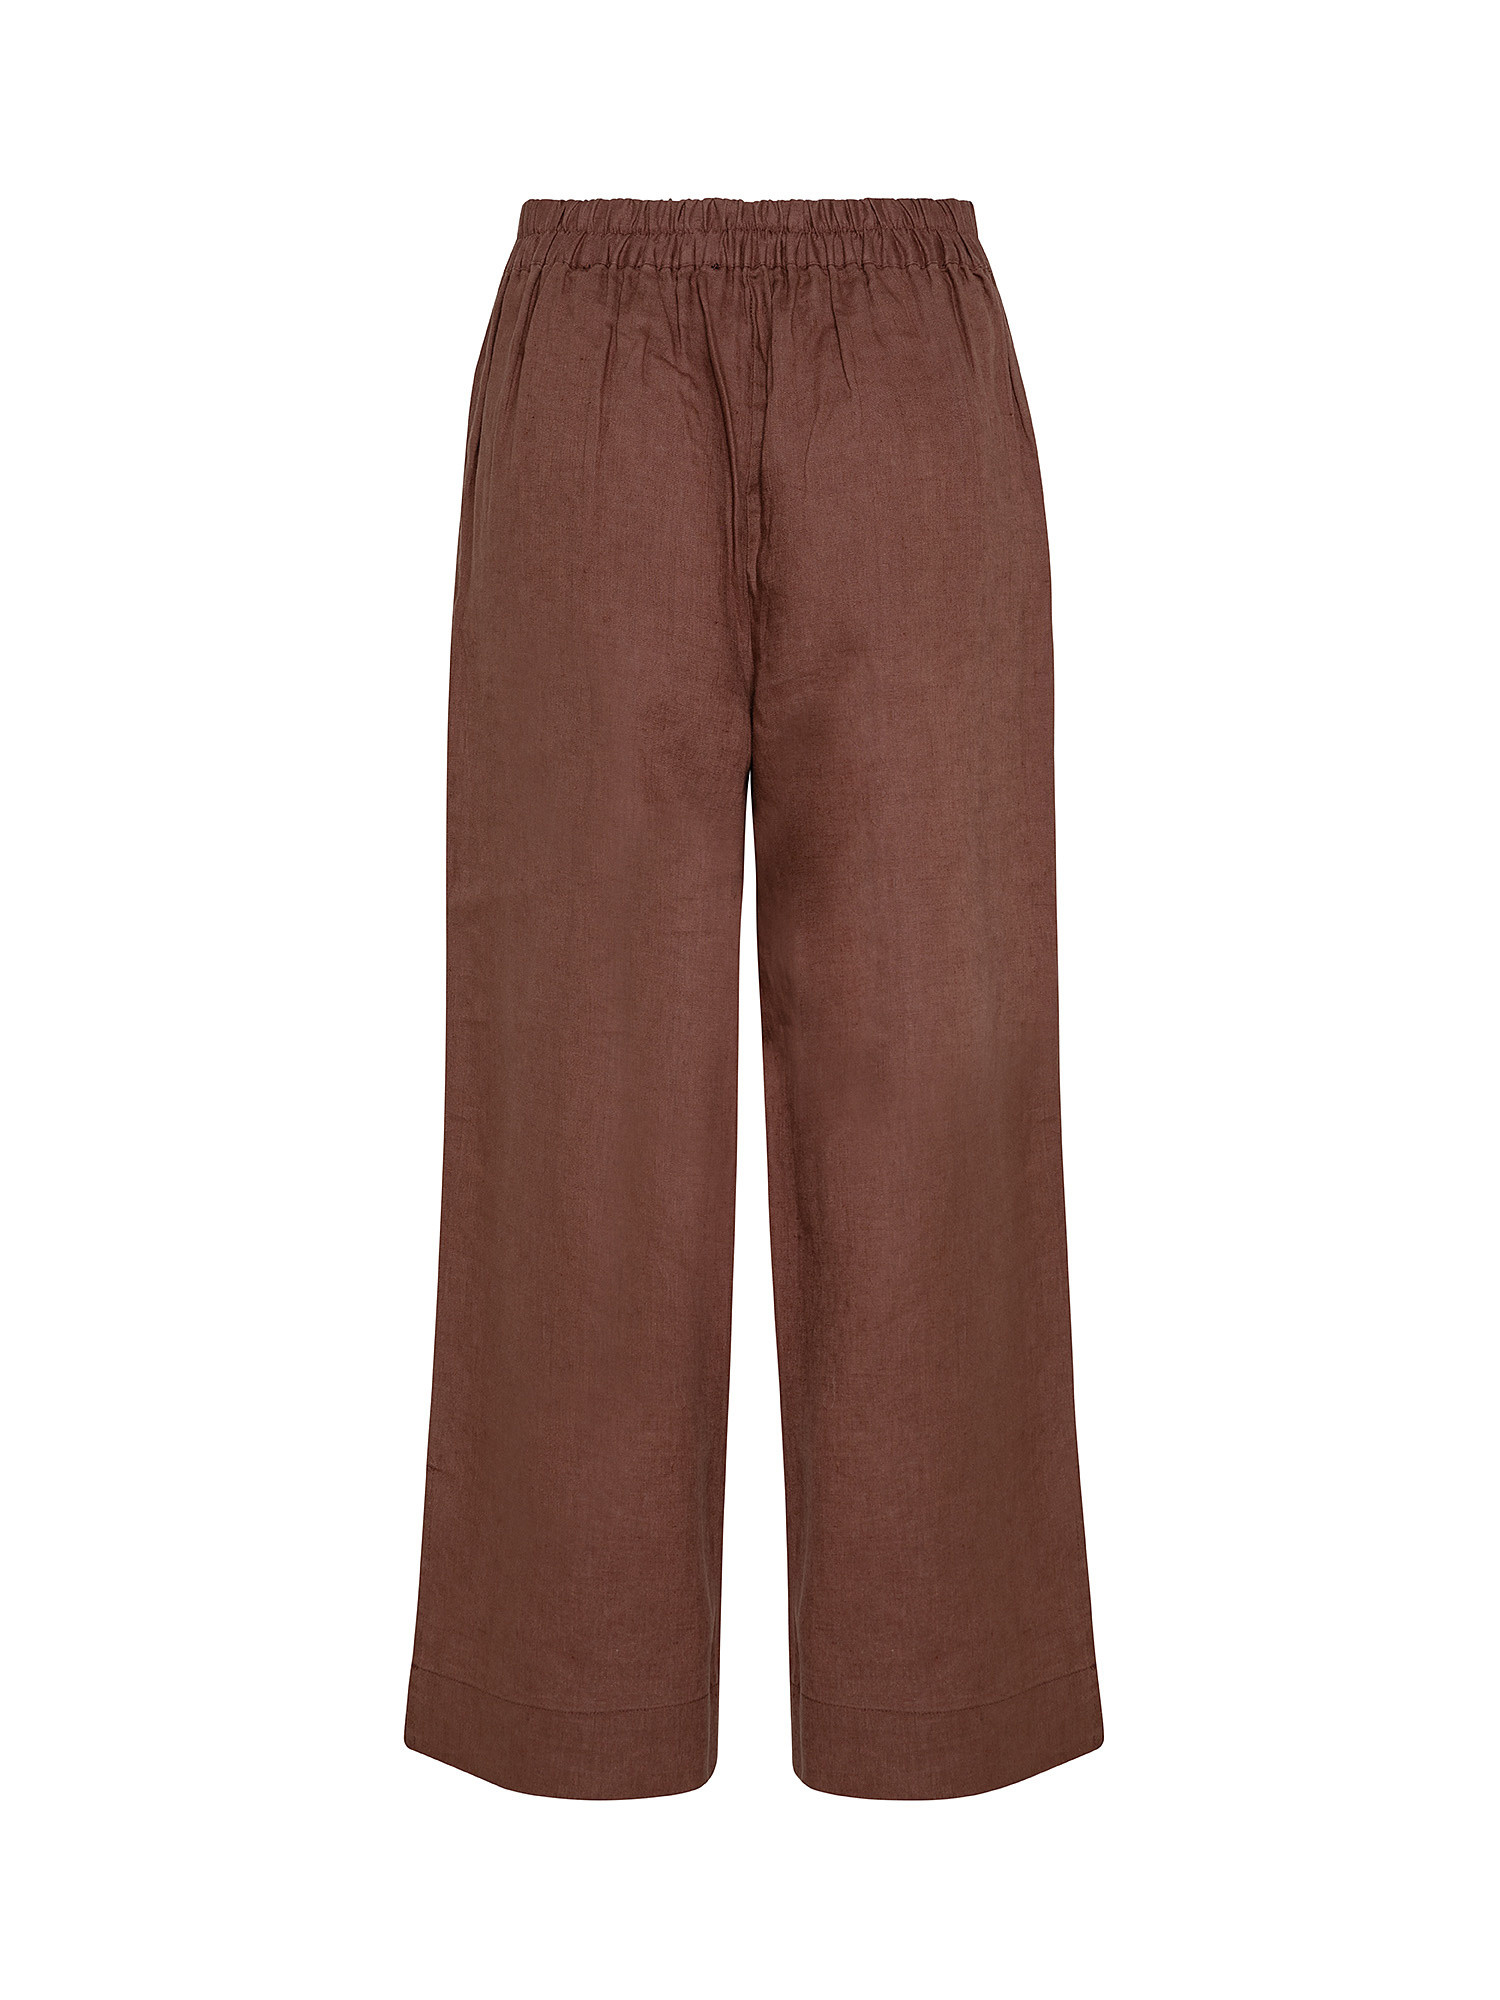 Pure linen trousers with slits, Brown, large image number 1